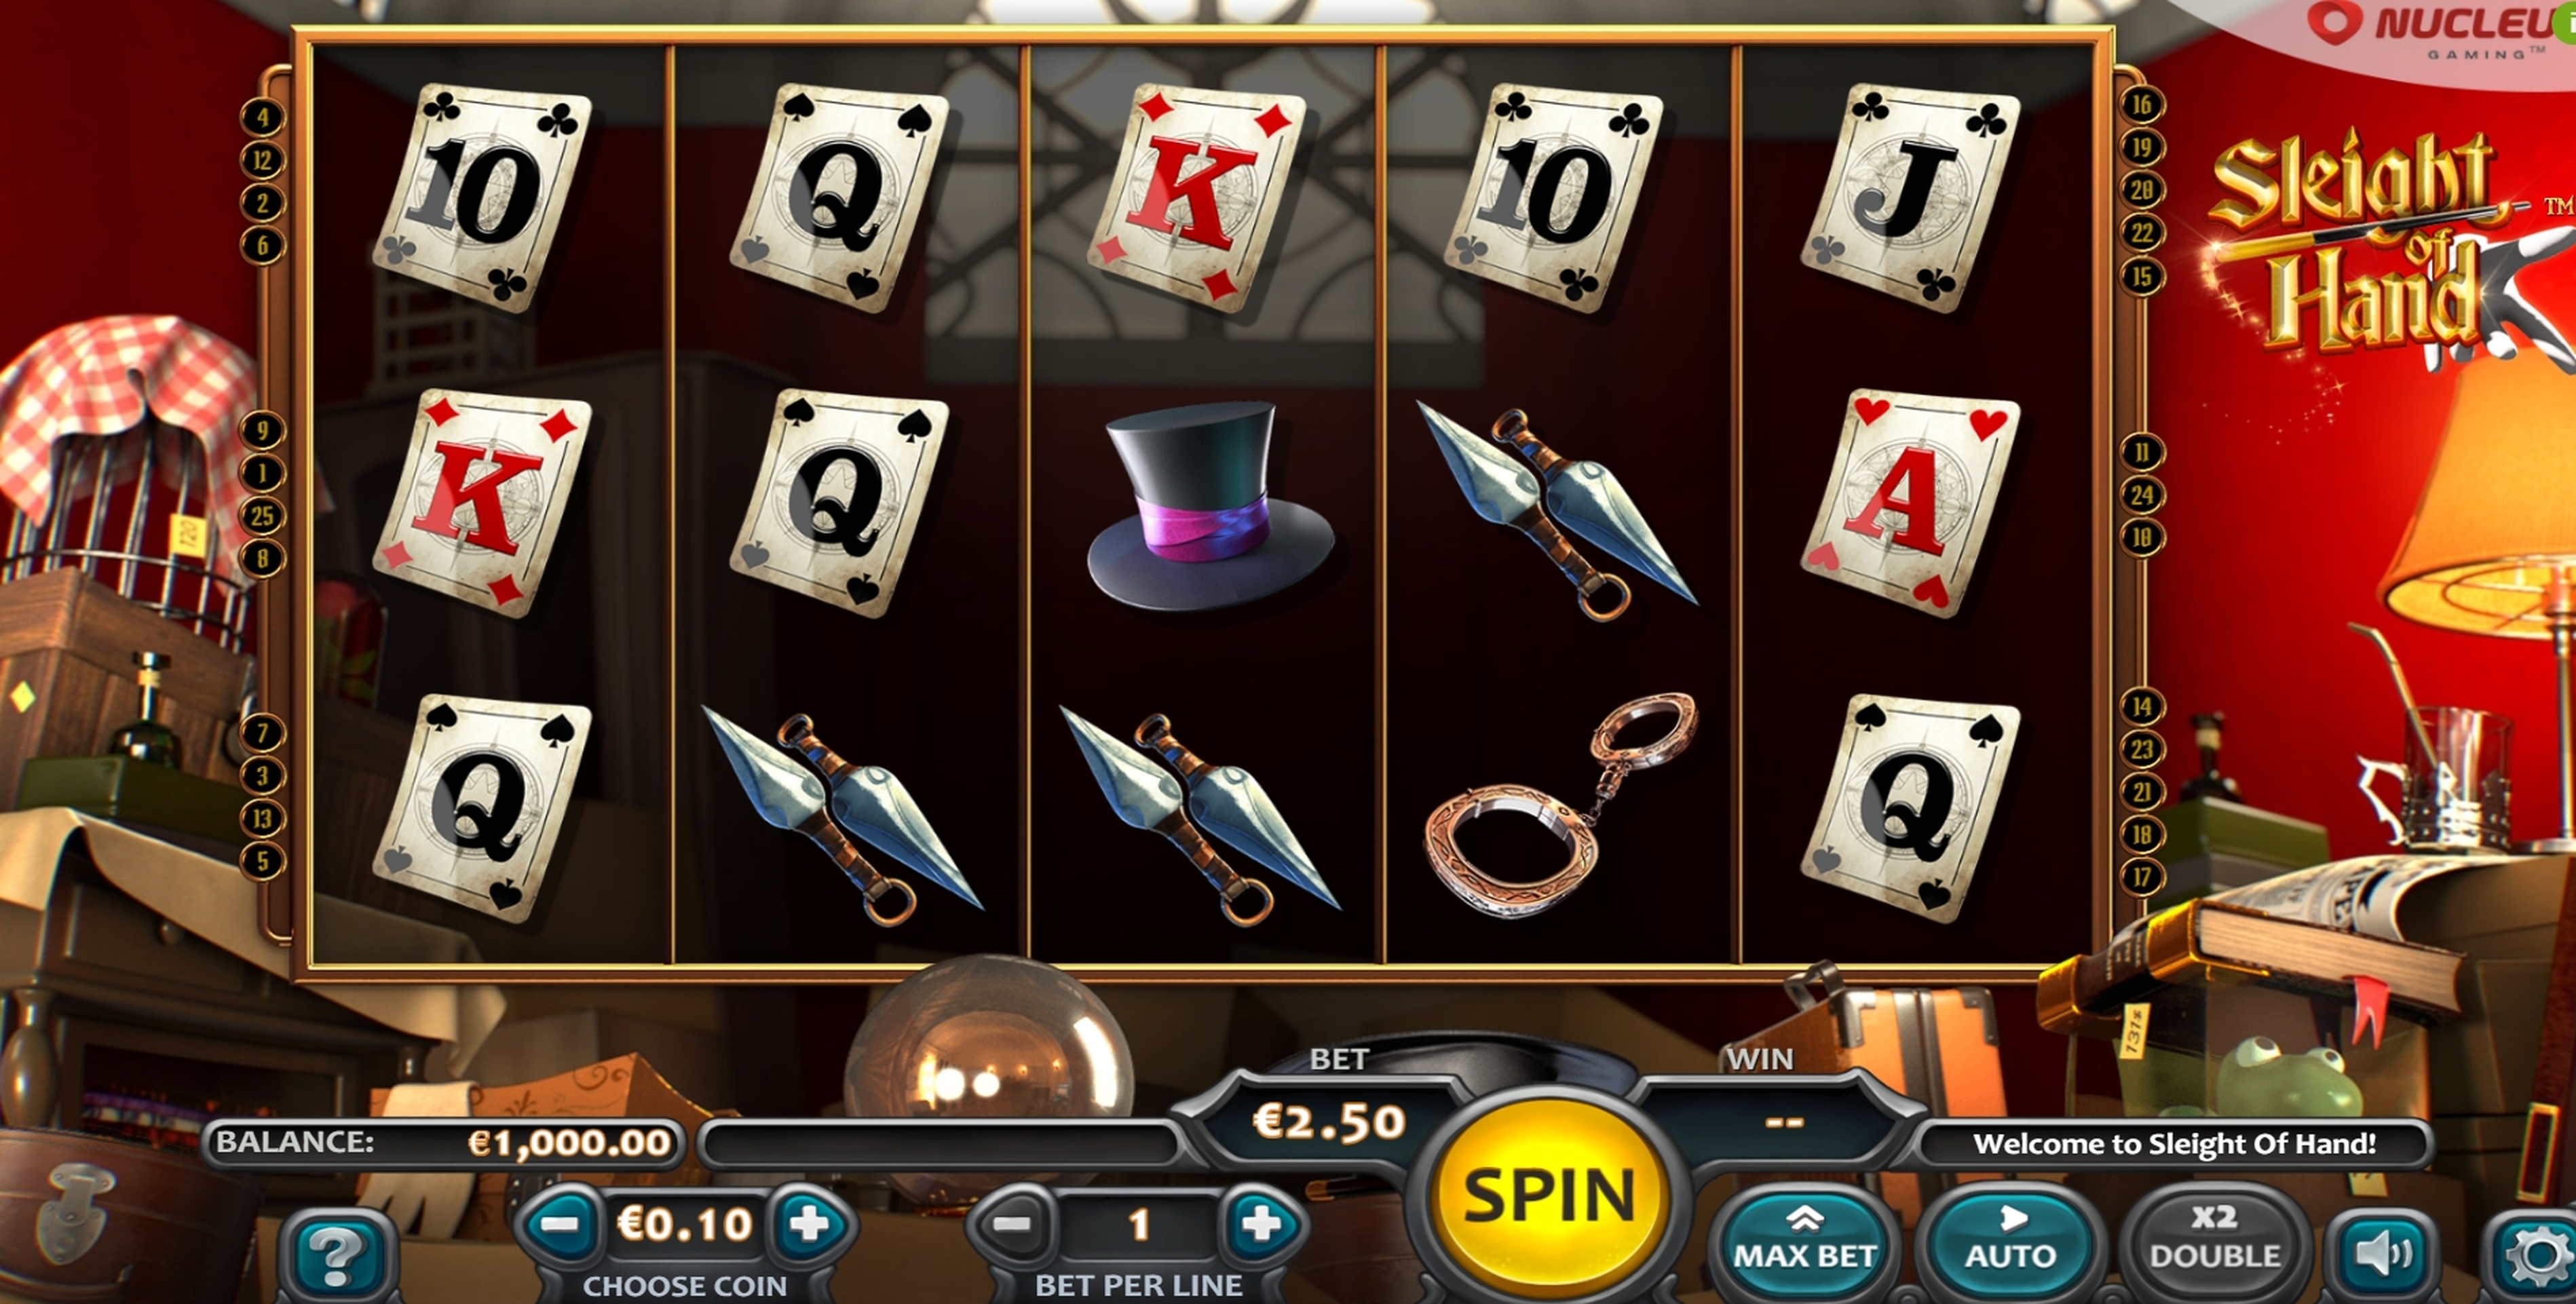 Reels in Sleight of Hand Slot Game by Nucleus Gaming